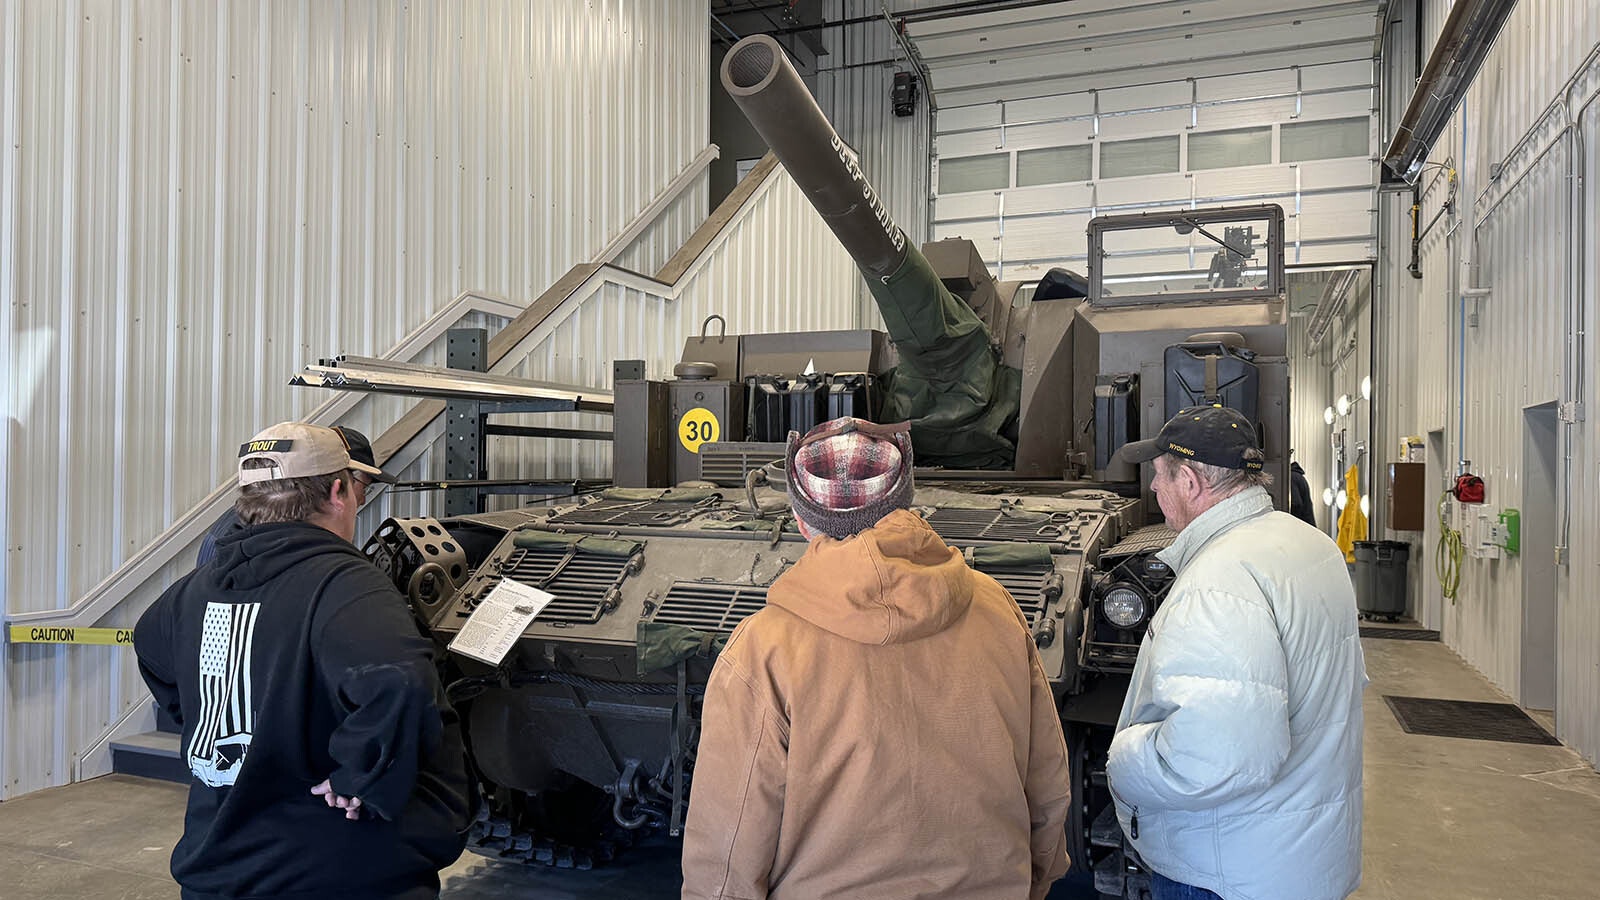 Visitors admire an M44 self-propelled howitzer in the facility's 700-square-foot wash bay.